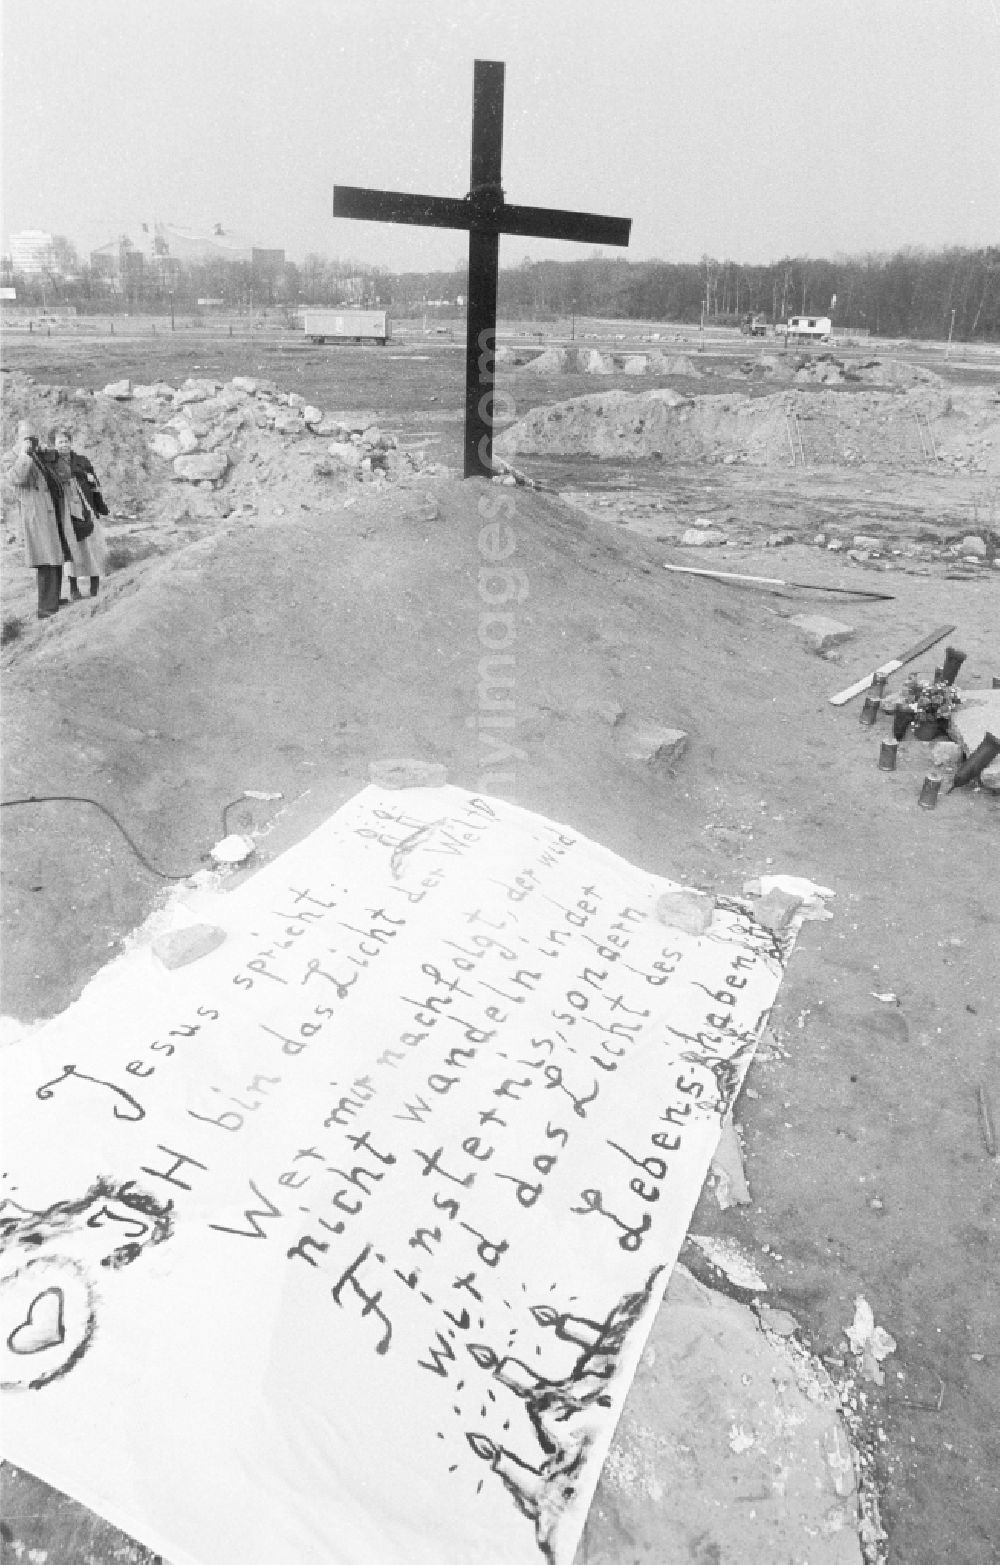 GDR photo archive: Berlin - Warning and commemorative cross on the fragments and remains of the concrete bunker systems Fuehrerbunker - Reichskanzlei on Vossstrasse in the district Mitte in Berlin East Berlin on the territory of the former GDR, German Democratic Republic